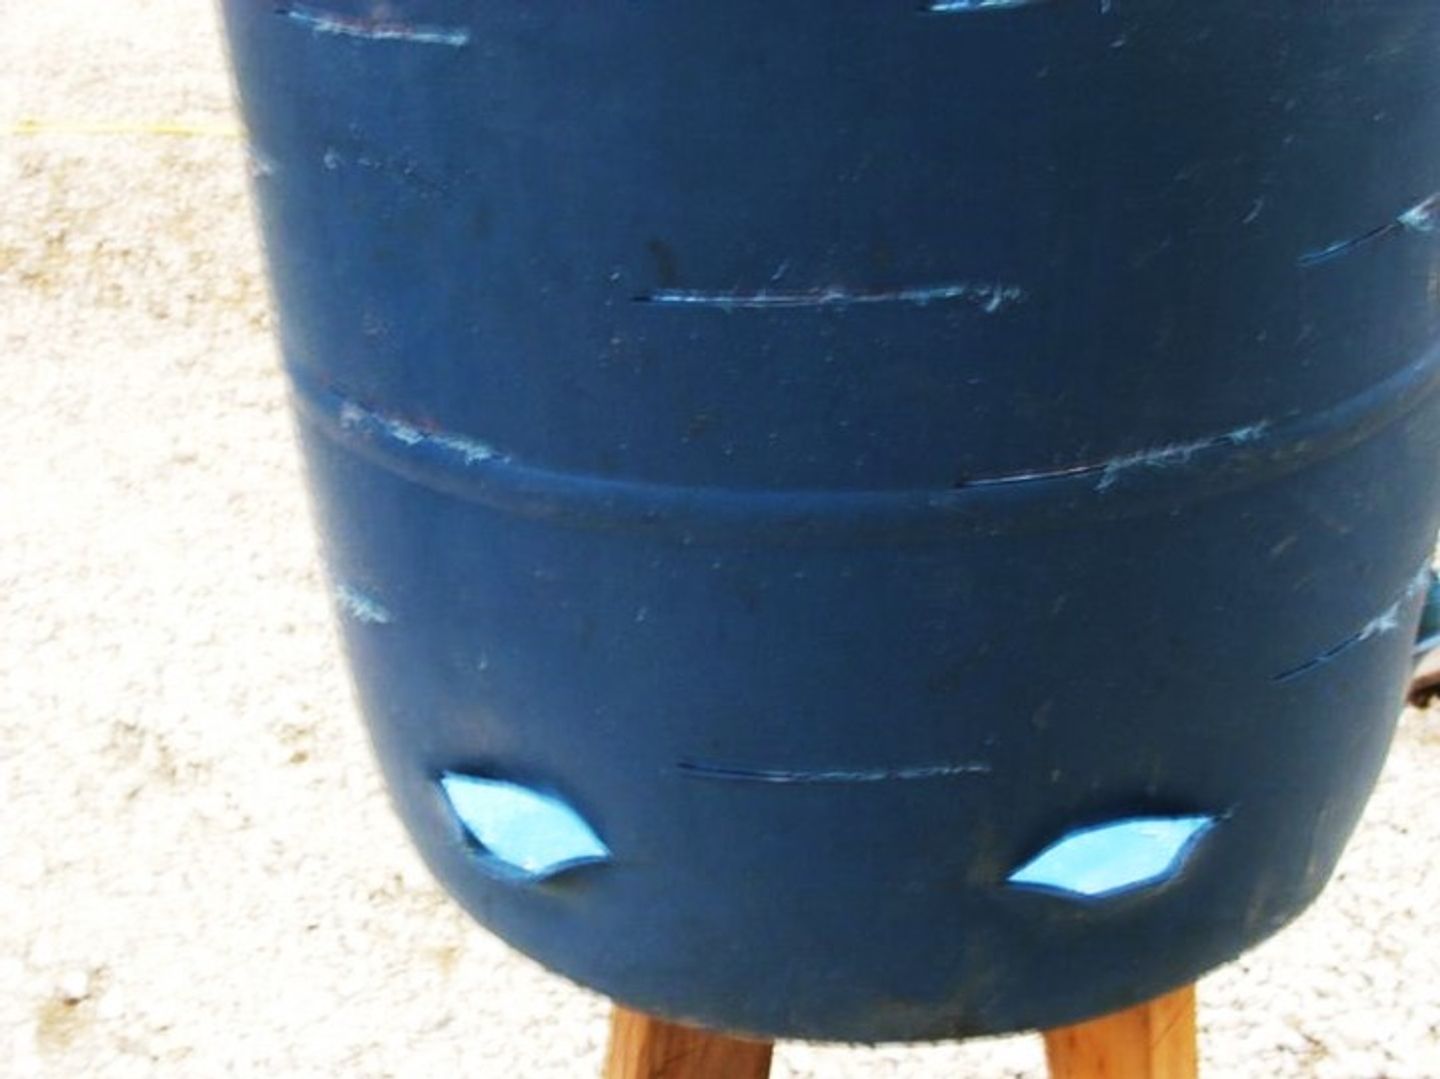 Barrel with marked lines and already two holes in the sides